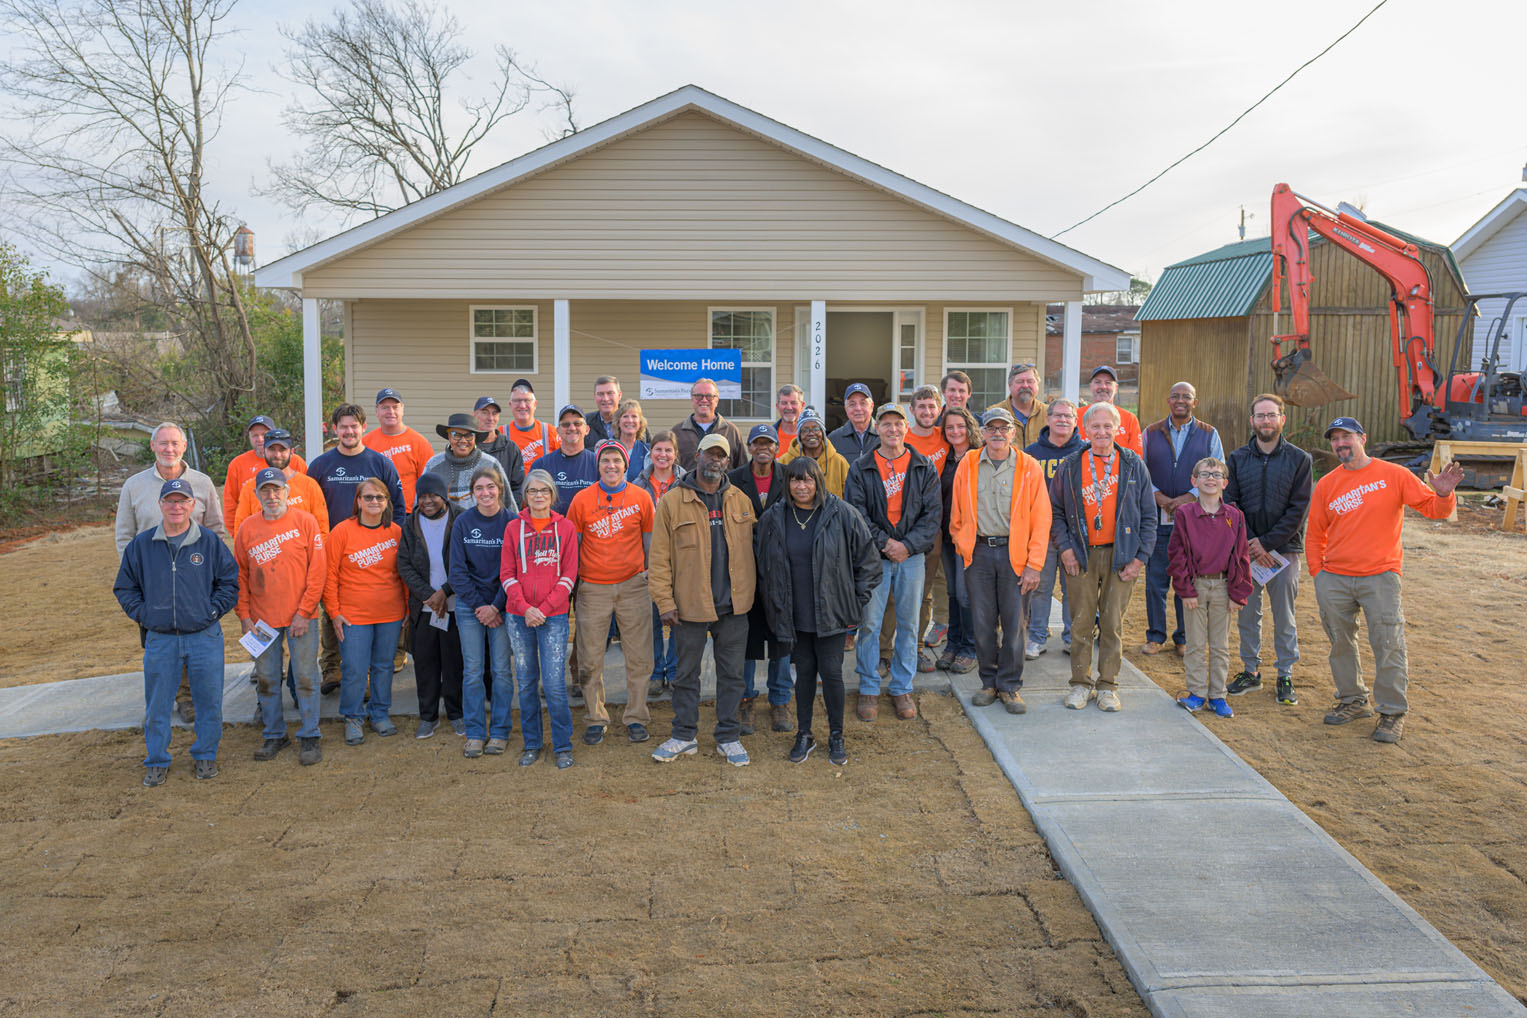 Our rebuild team celebrated Lewis Sharpe's new home provided by Samaritan's Purse.